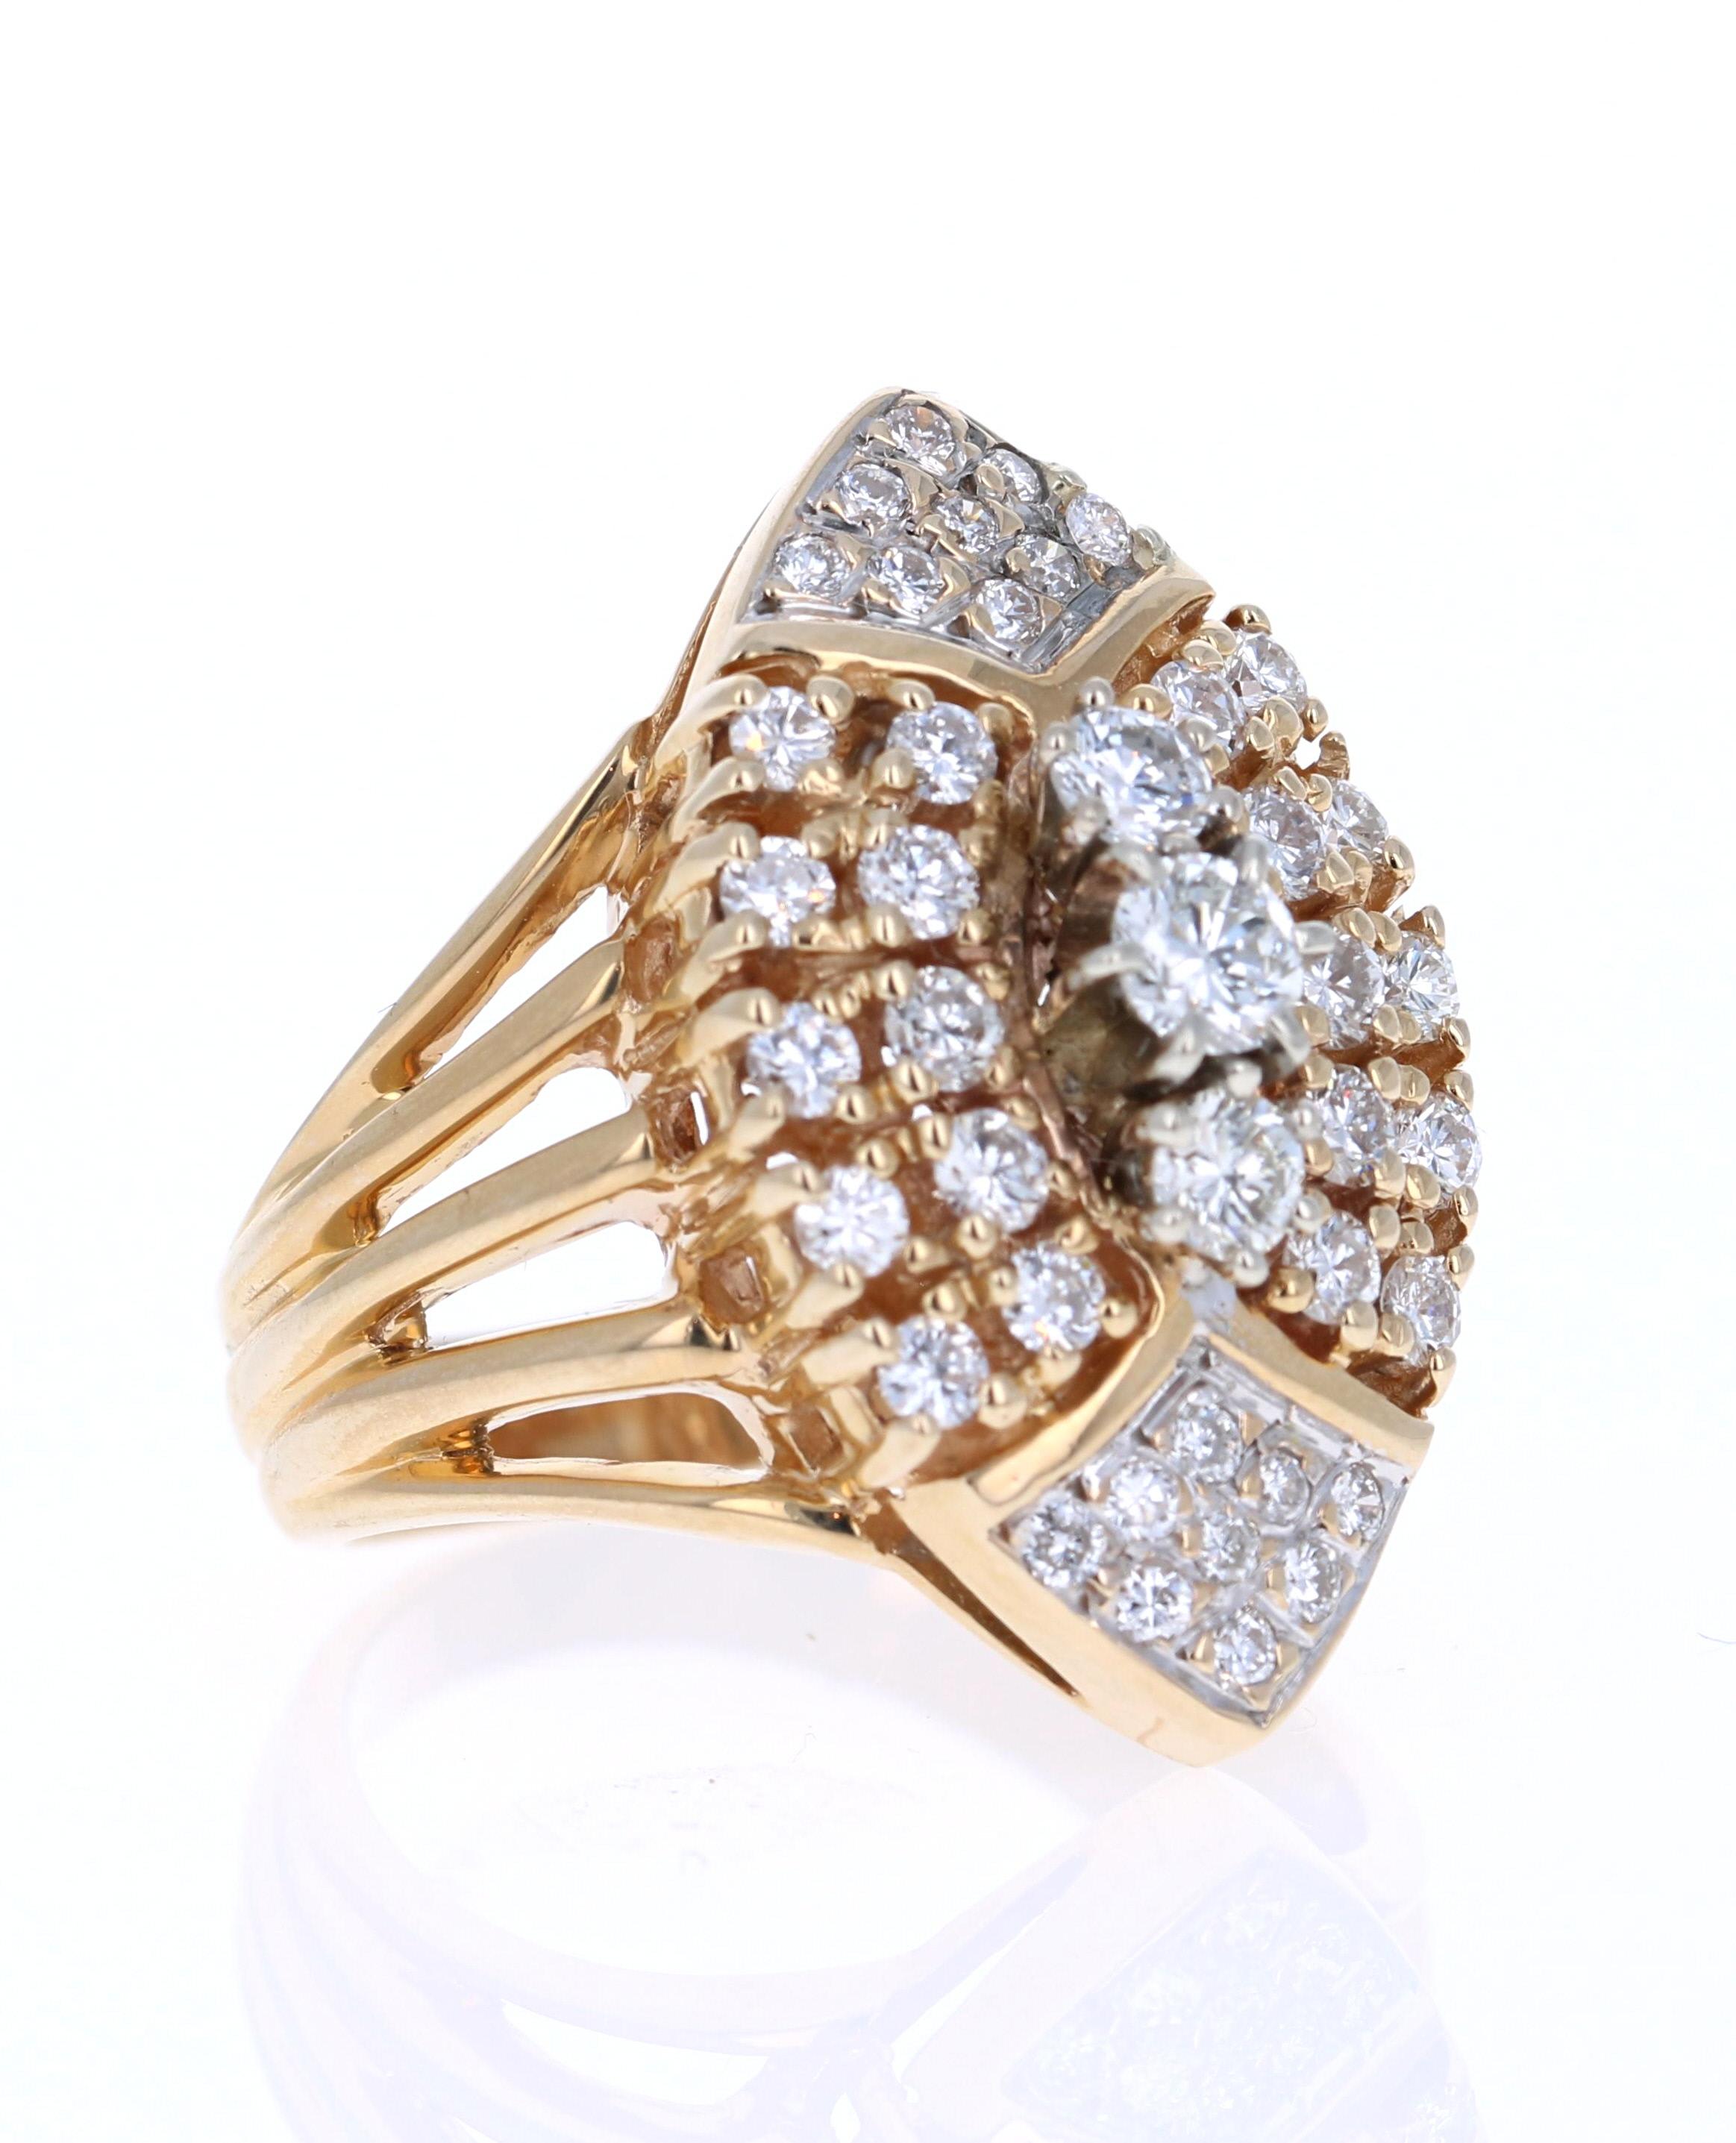 This unique cluster ring has 41 Round Cut Diamond that weigh 1.25 Carats (Clarity: VS, Color: F)

The ring is set in 14 Karat Yellow Gold and has an approximate weight of 9.2 grams. 

The ring is a size 7 and can be re-sized free of charge if